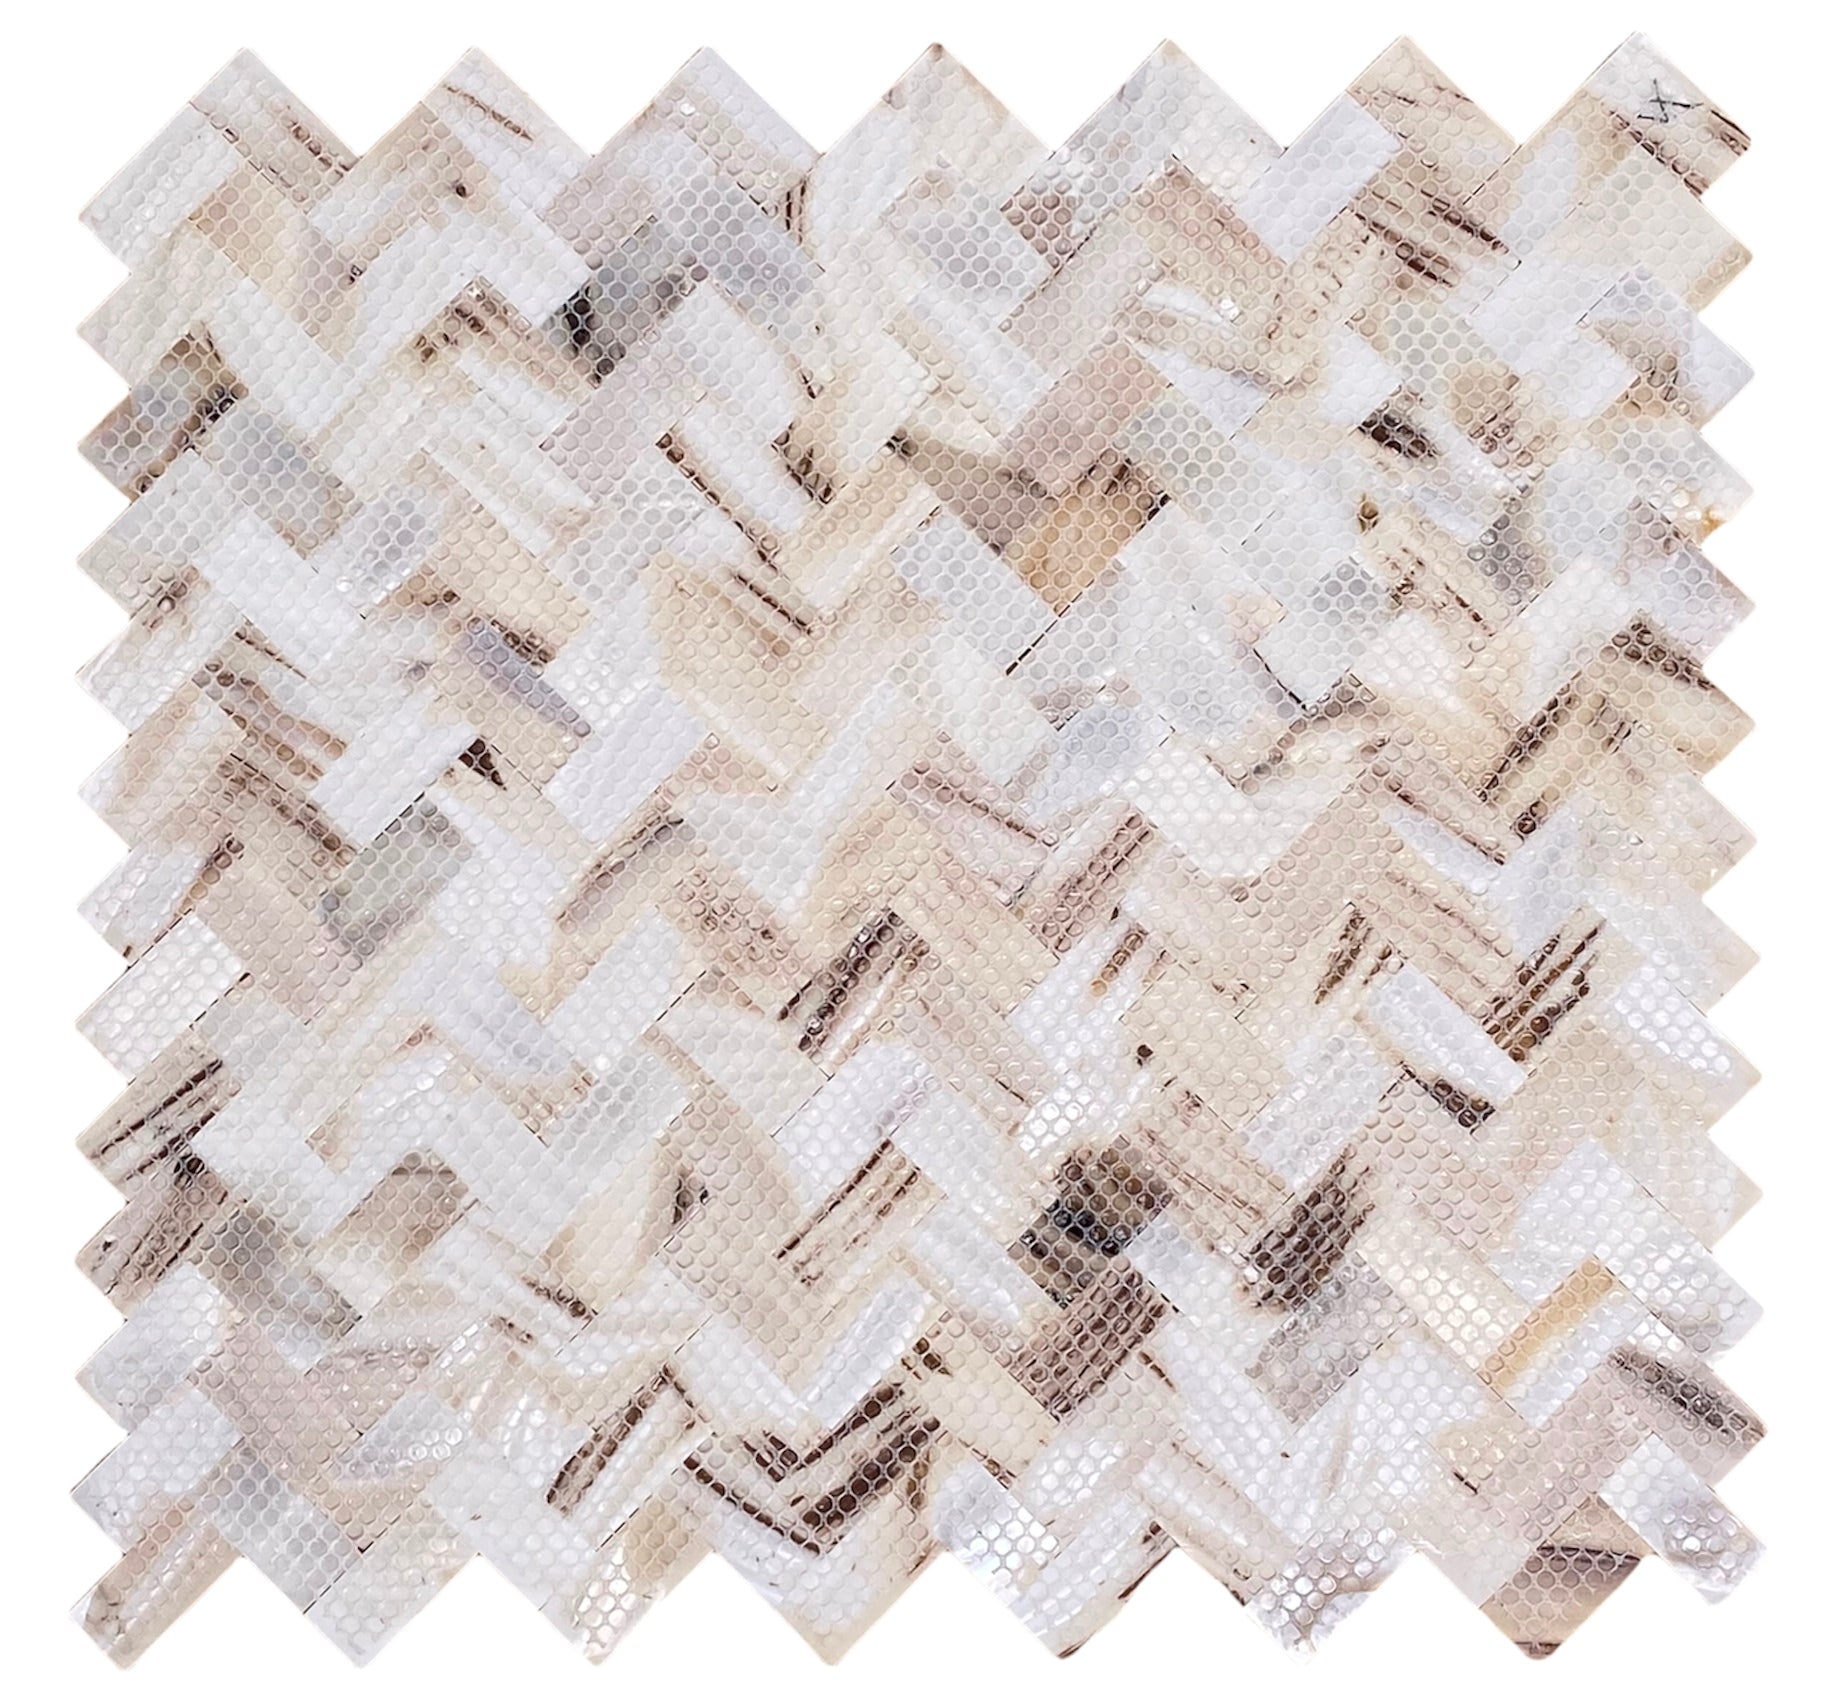 Mother of Pearl Oyster White Natural Sea Shell Seamless Herringbone Tile for Kitchen Backsplashes By Tenedos